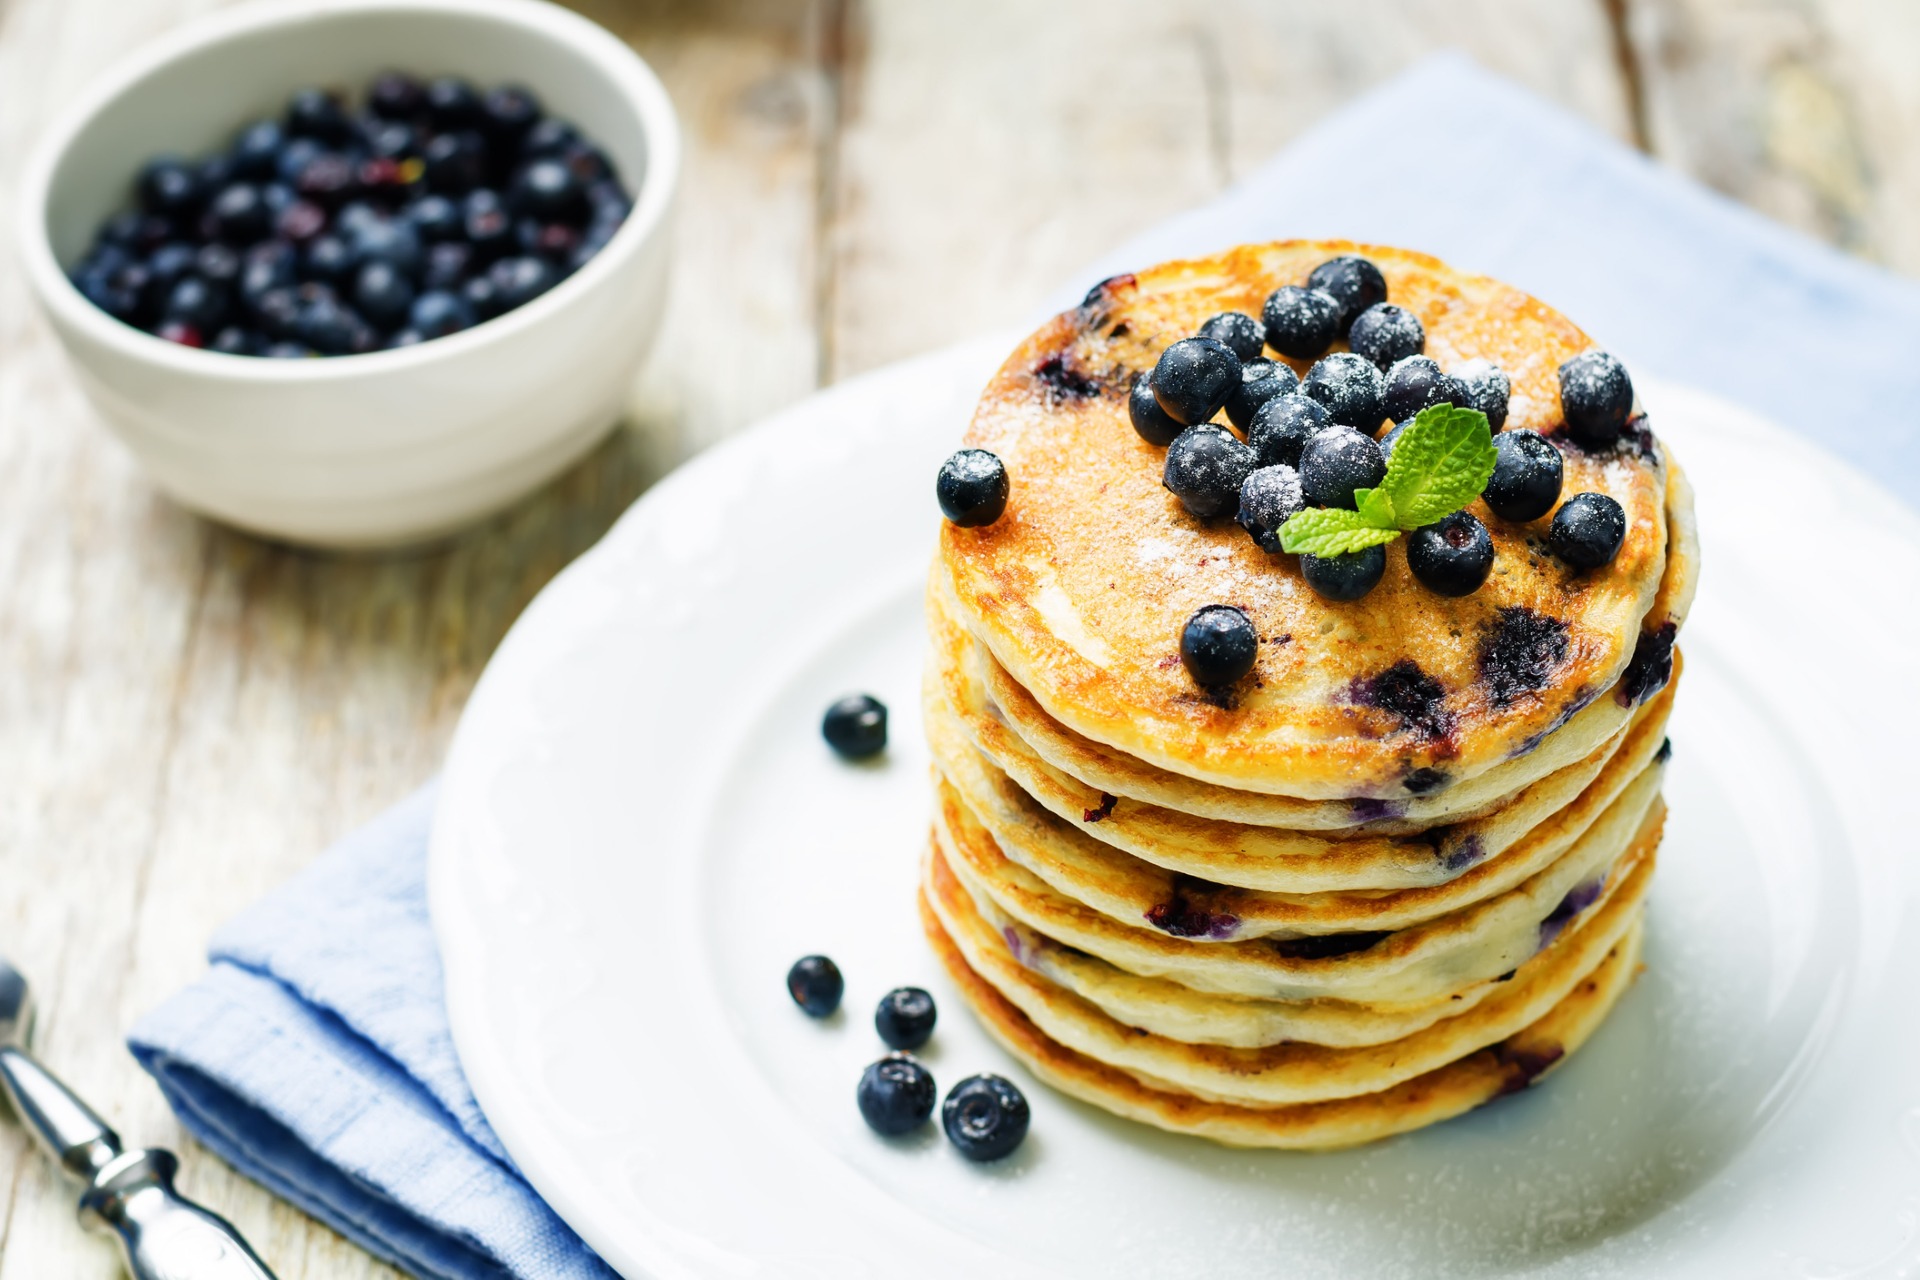 This is a photo of a stack of pancakes topped with blueberries.